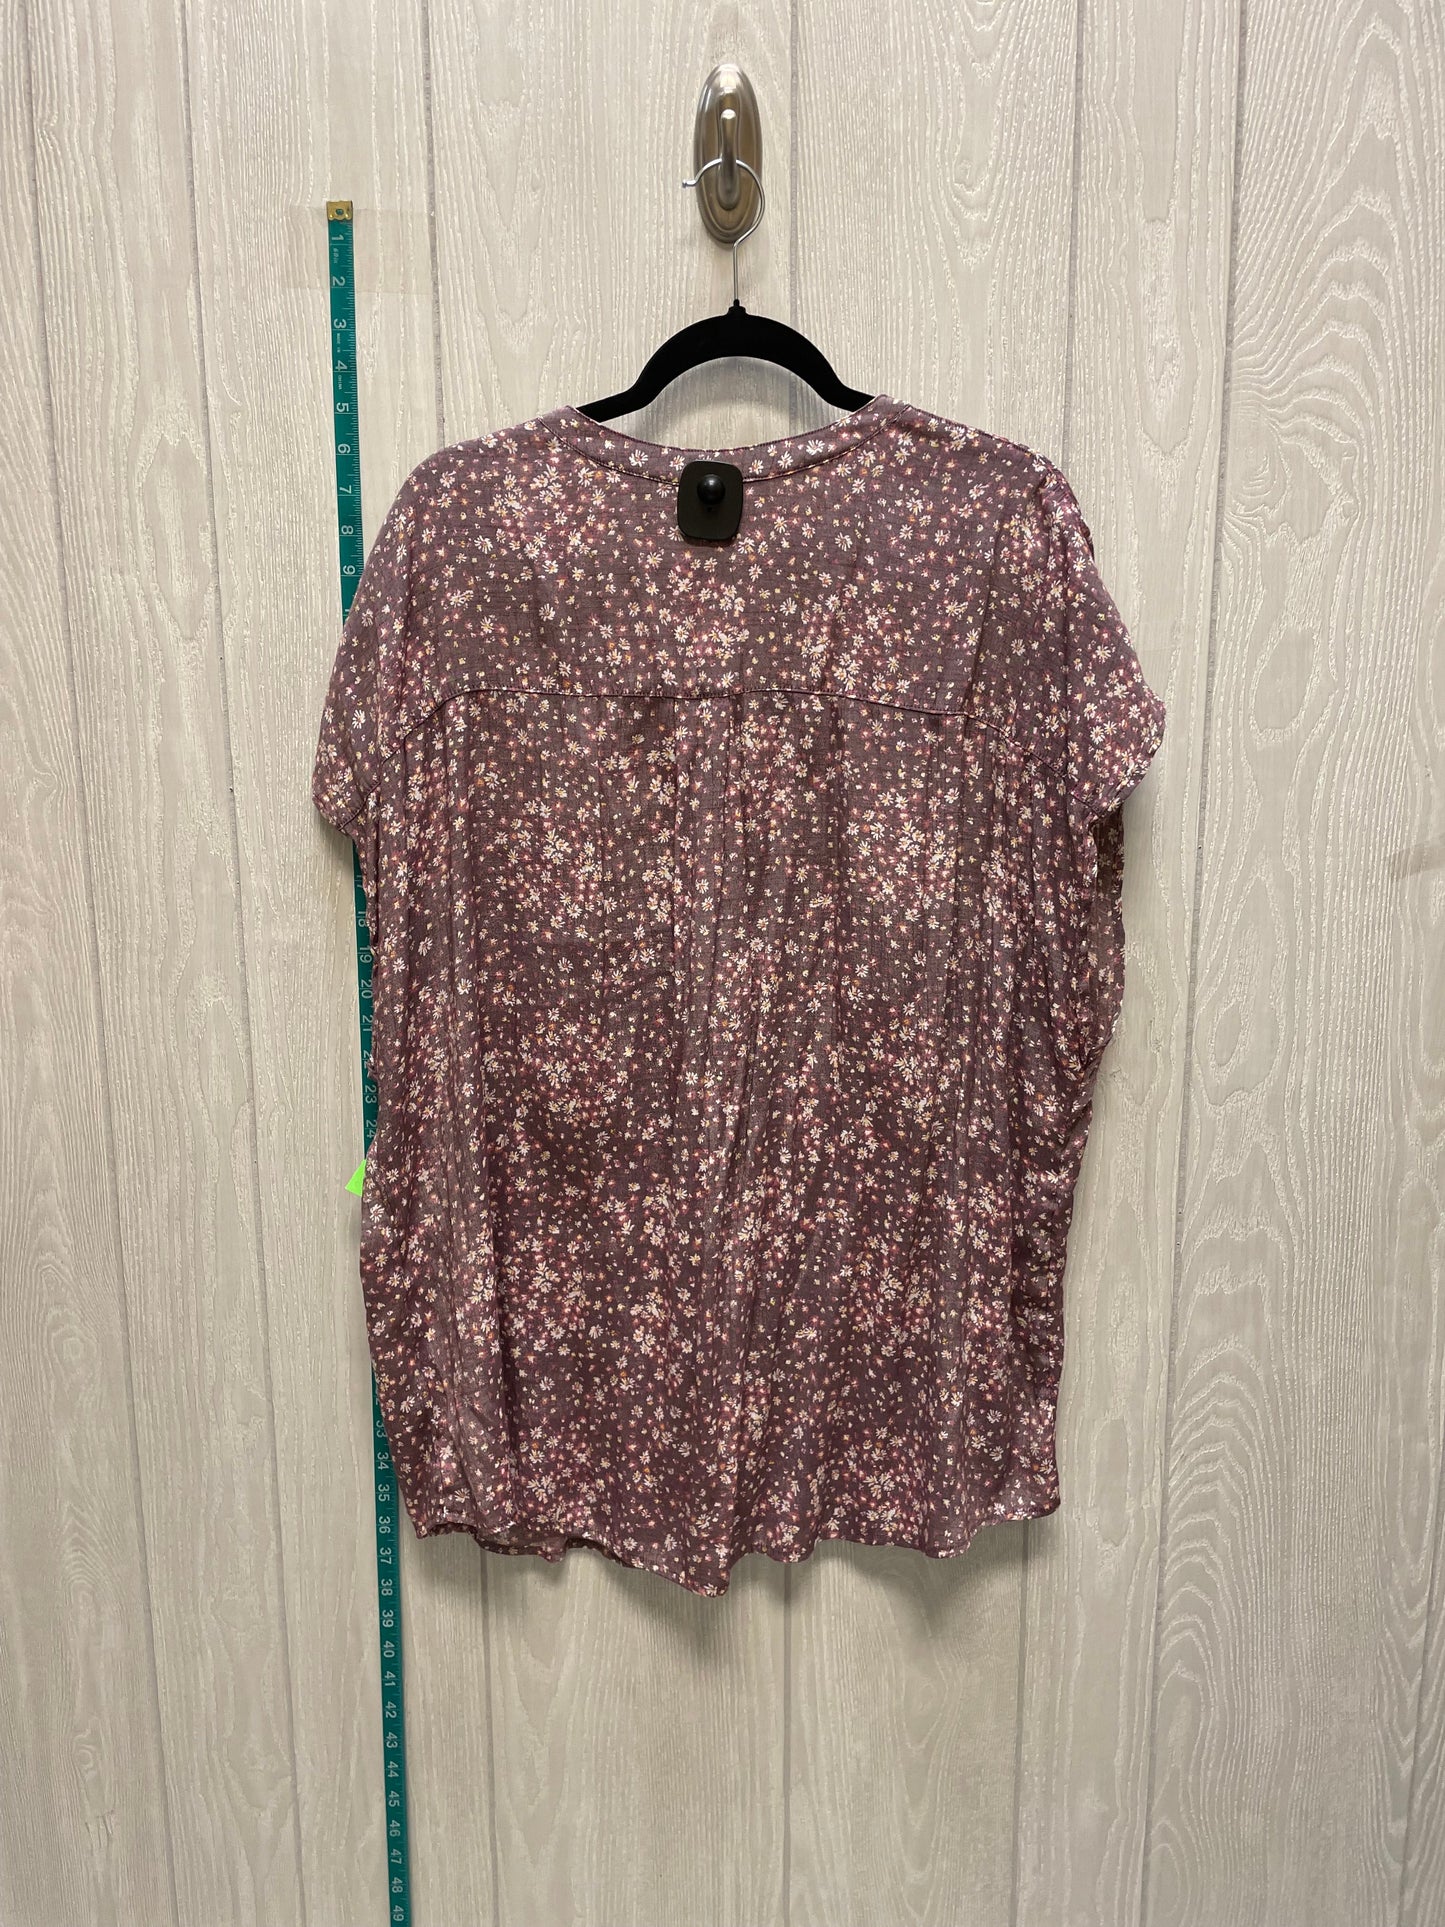 Blouse Short Sleeve By Torrid  Size: 2x